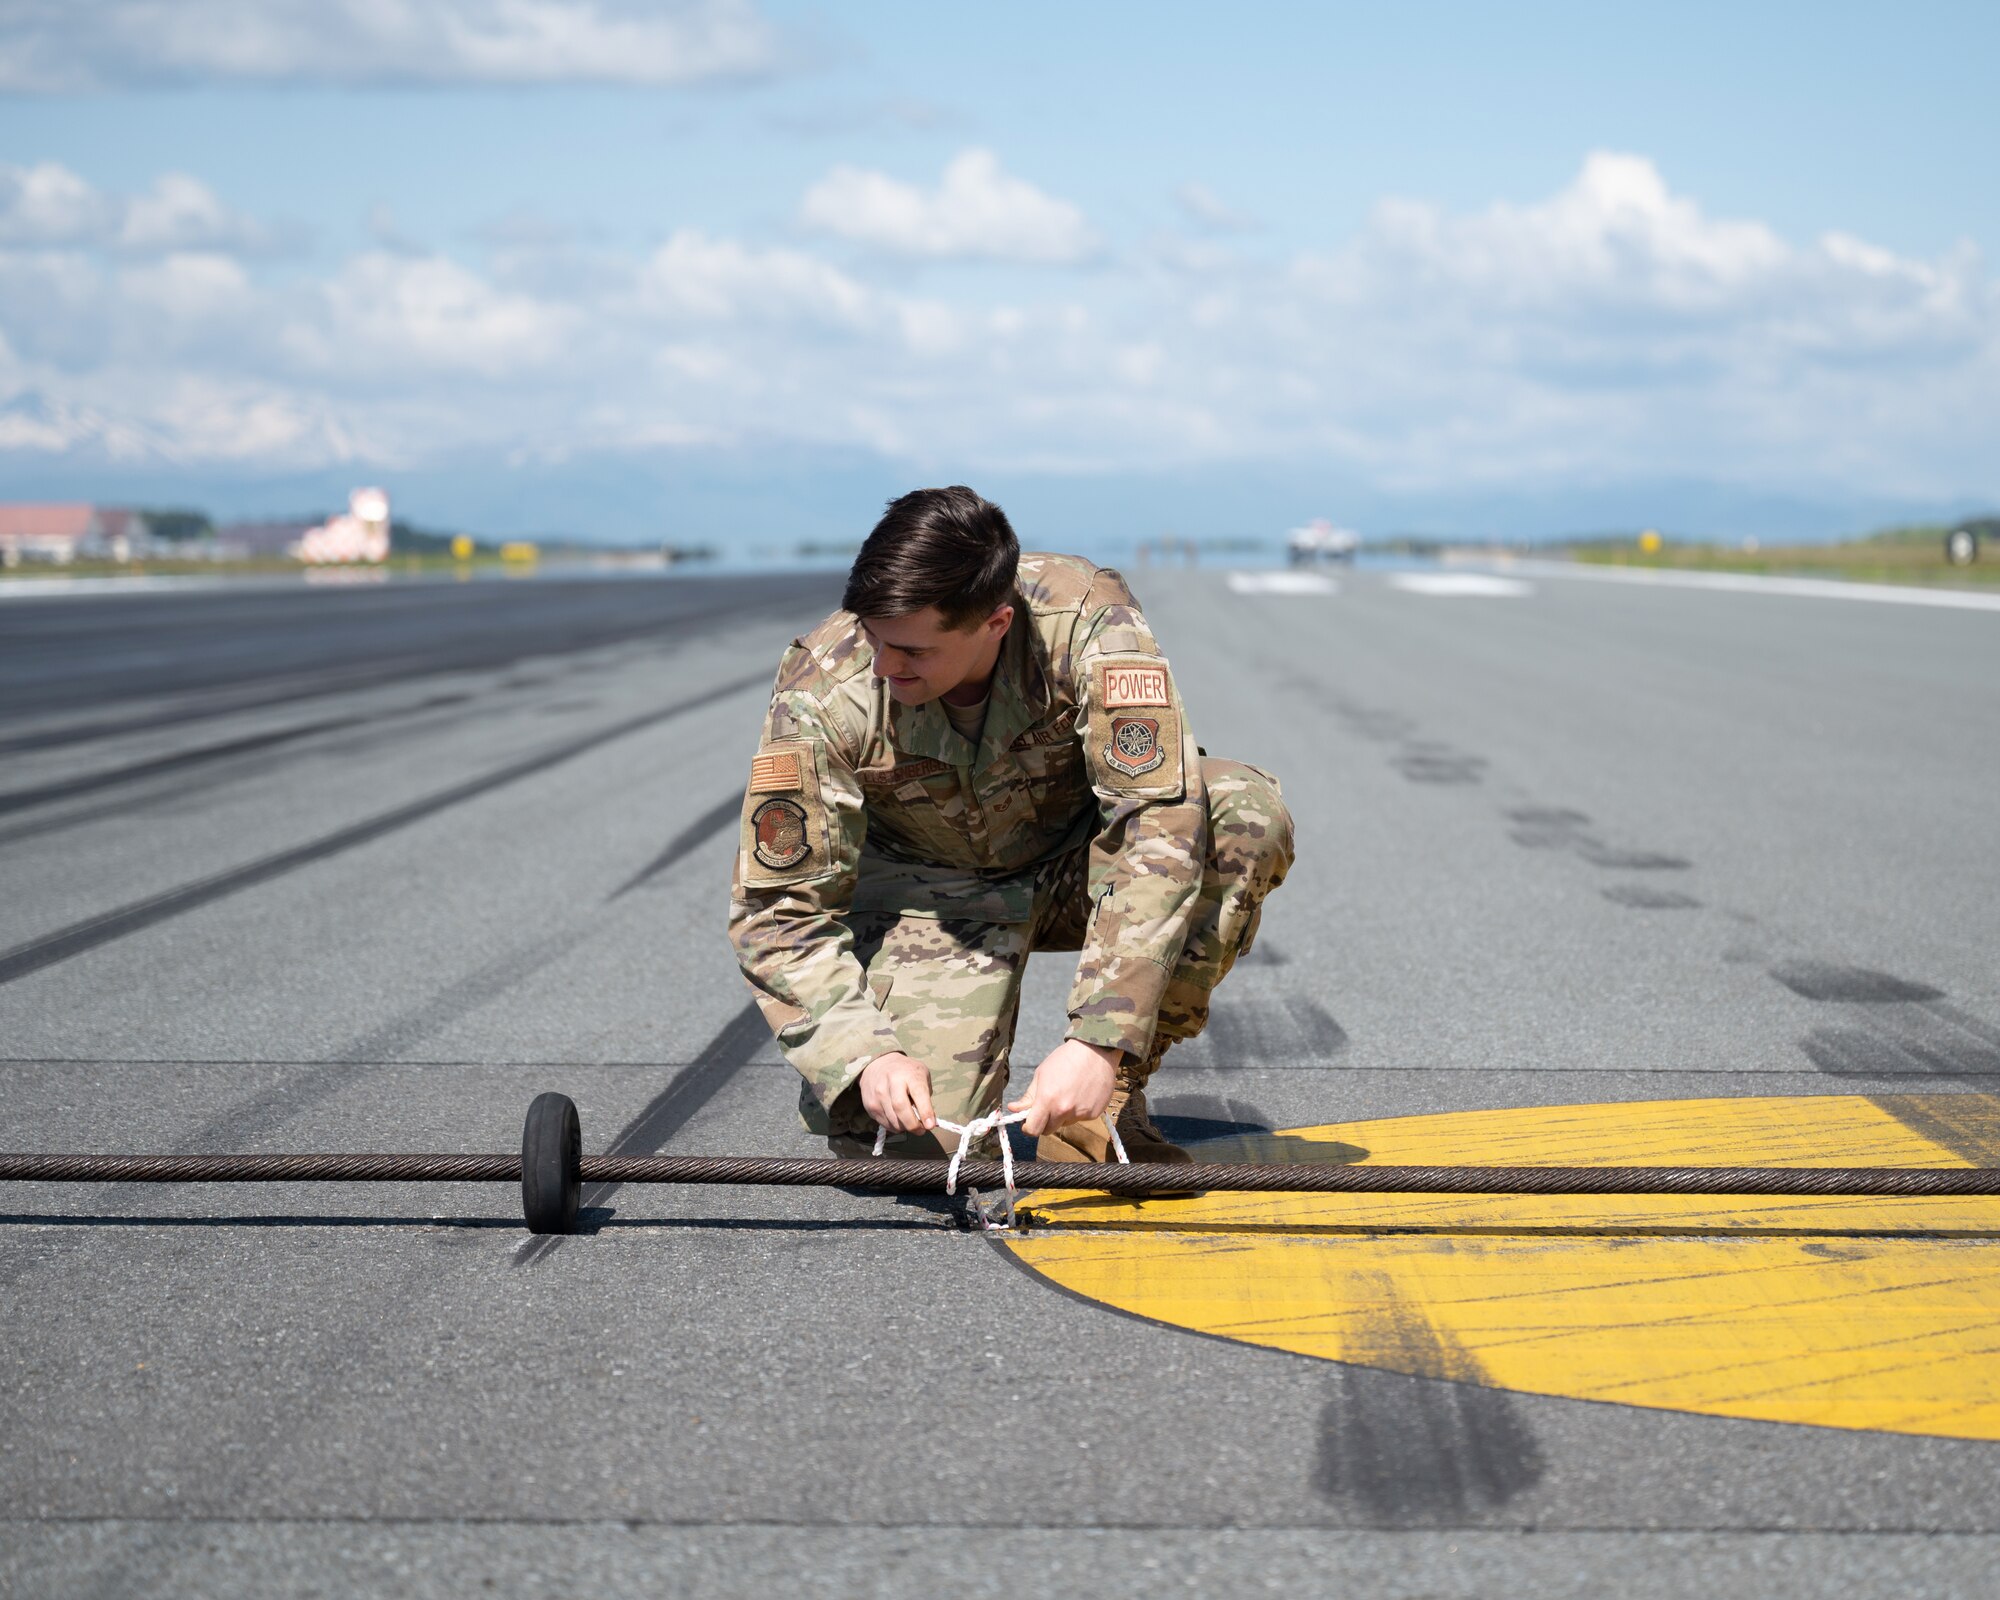 Airmen ties down aircraft arresting systems